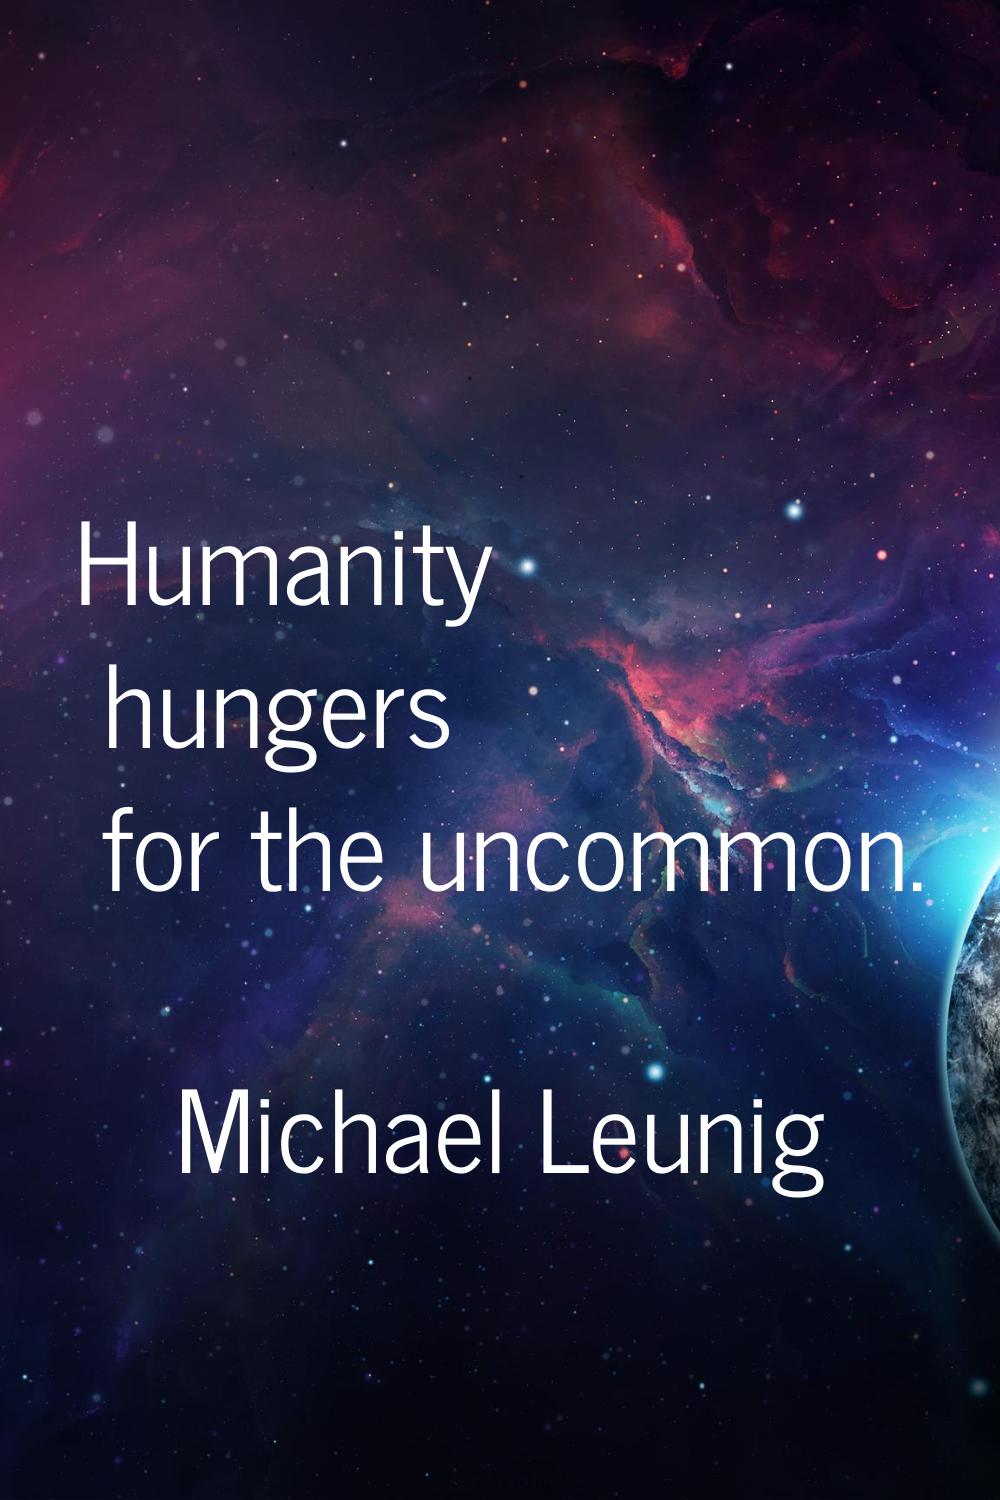 Humanity hungers for the uncommon.